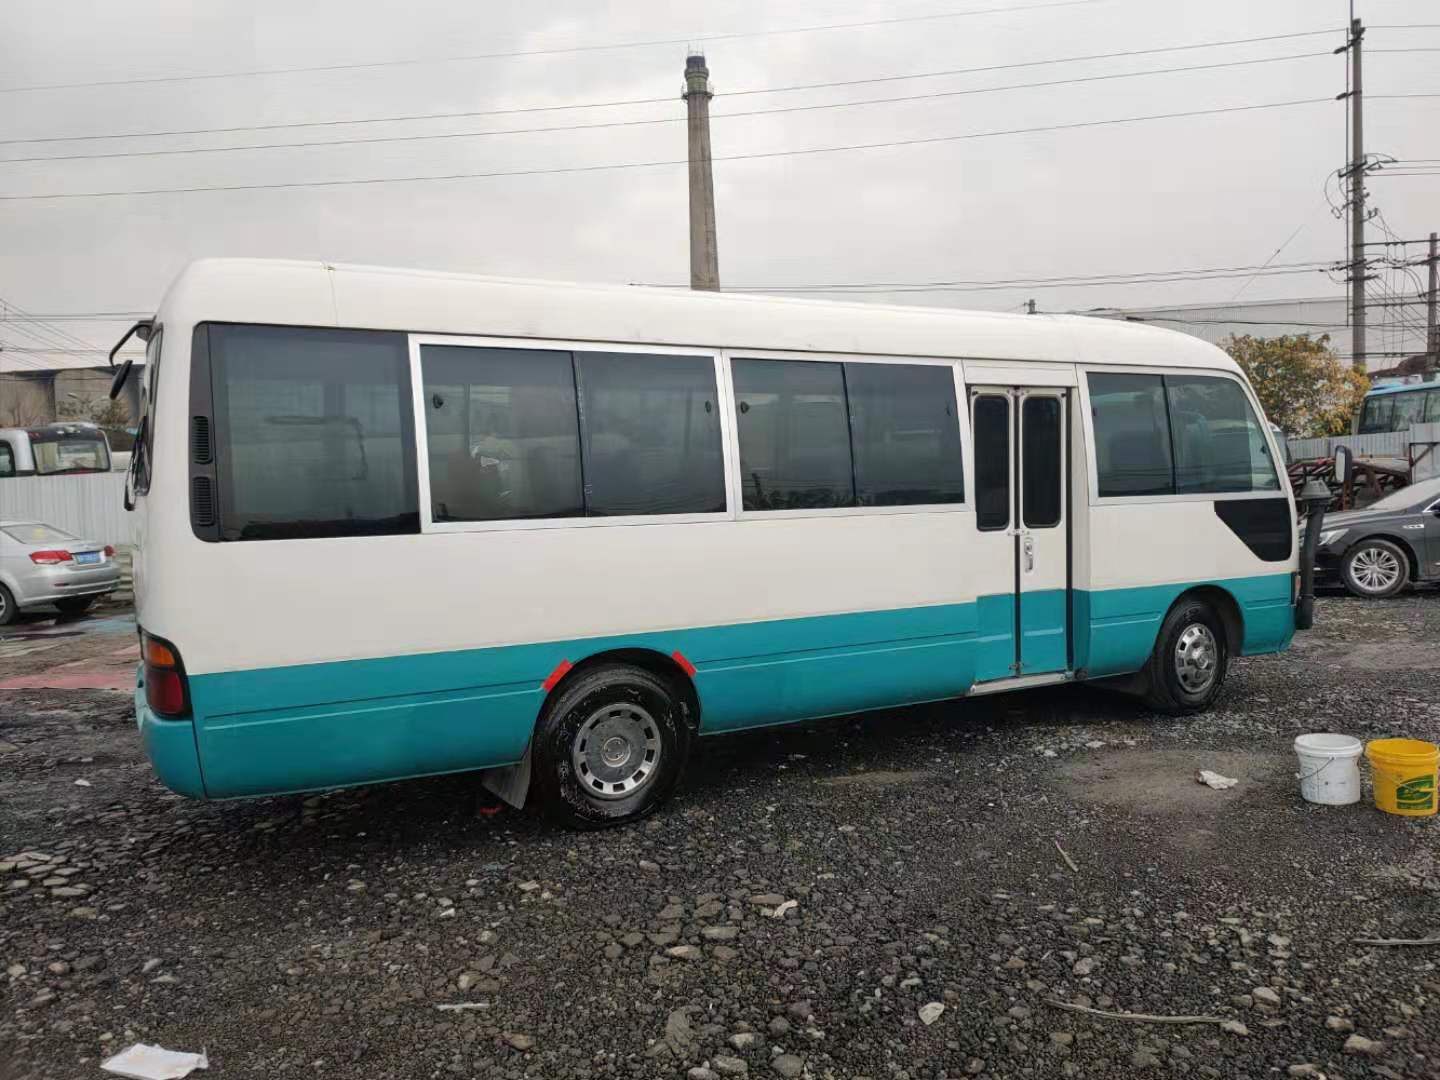 Quality Japan Brand price Used LHD coaster bus used Luxury coach bus for sale second hand diesel/petrol car hot sale wholesale